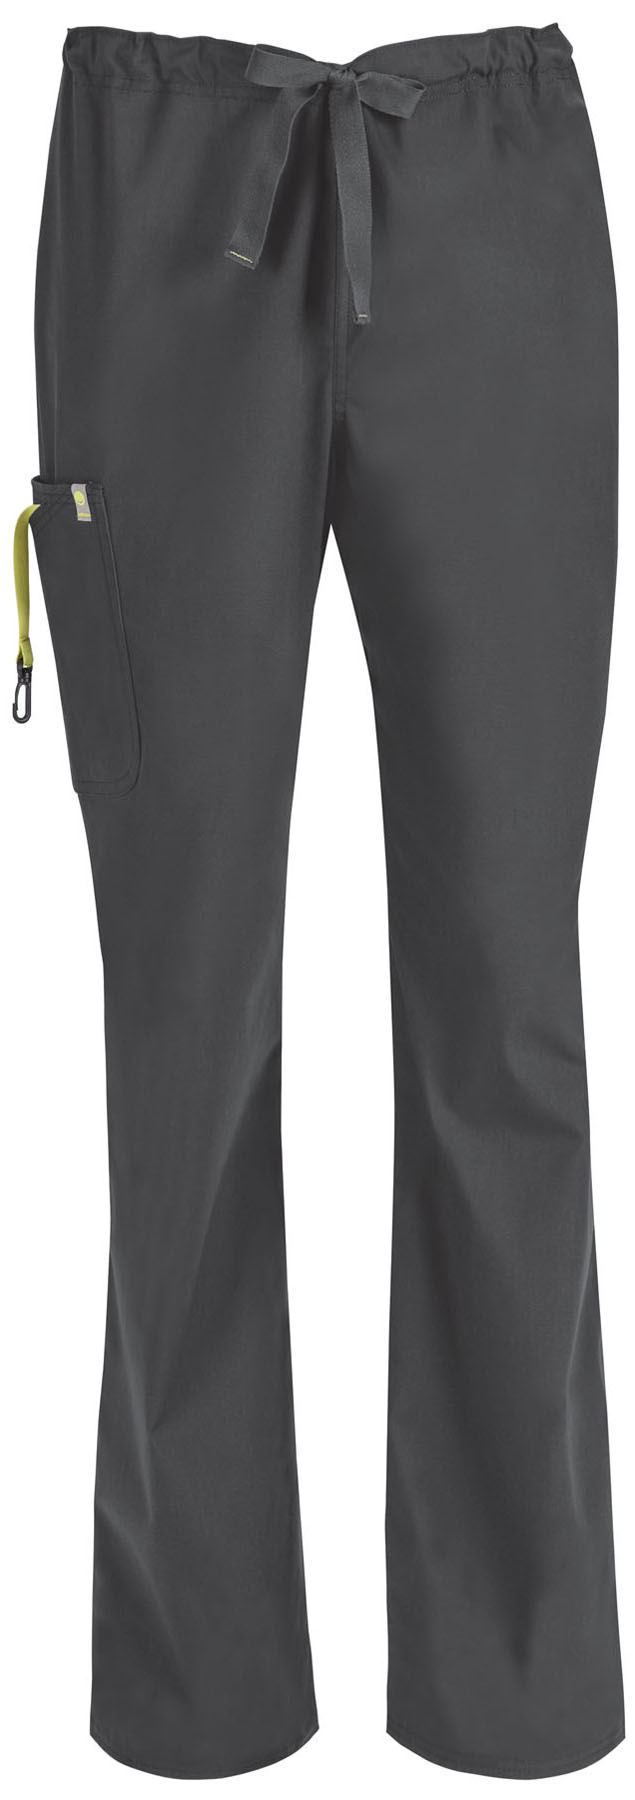 Code Happy Medical Bliss w/ Certainty Plus Mens 16001AB Mens Drawstring Cargo Pant-Code Happy